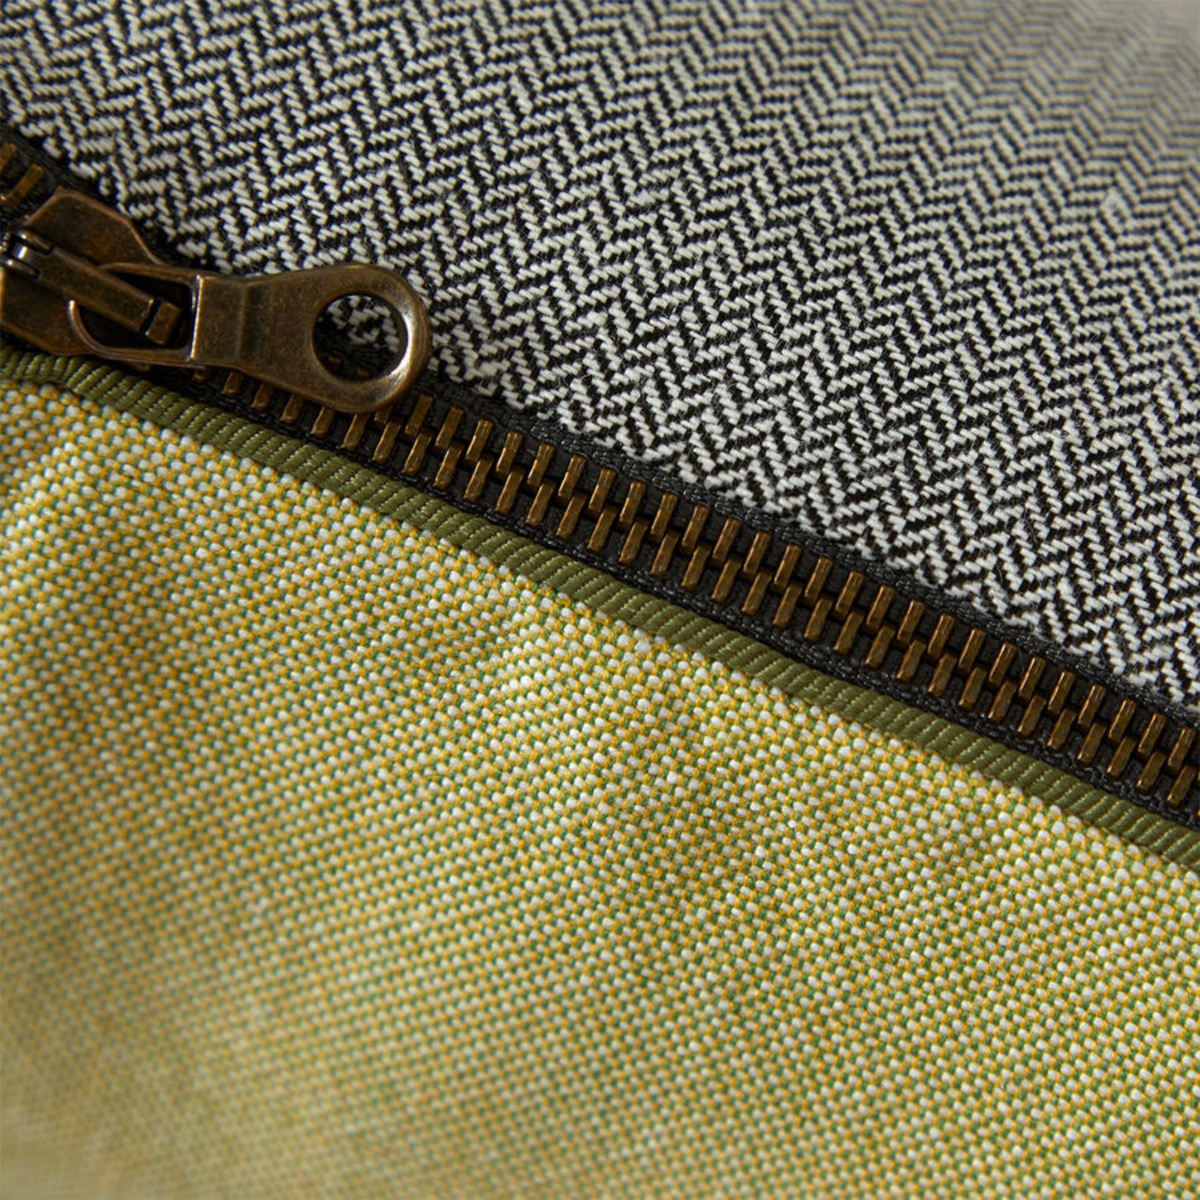 Zipper Detail of Decorative Pillow of Yves Delorme Tropical Bedding in Avocat Color